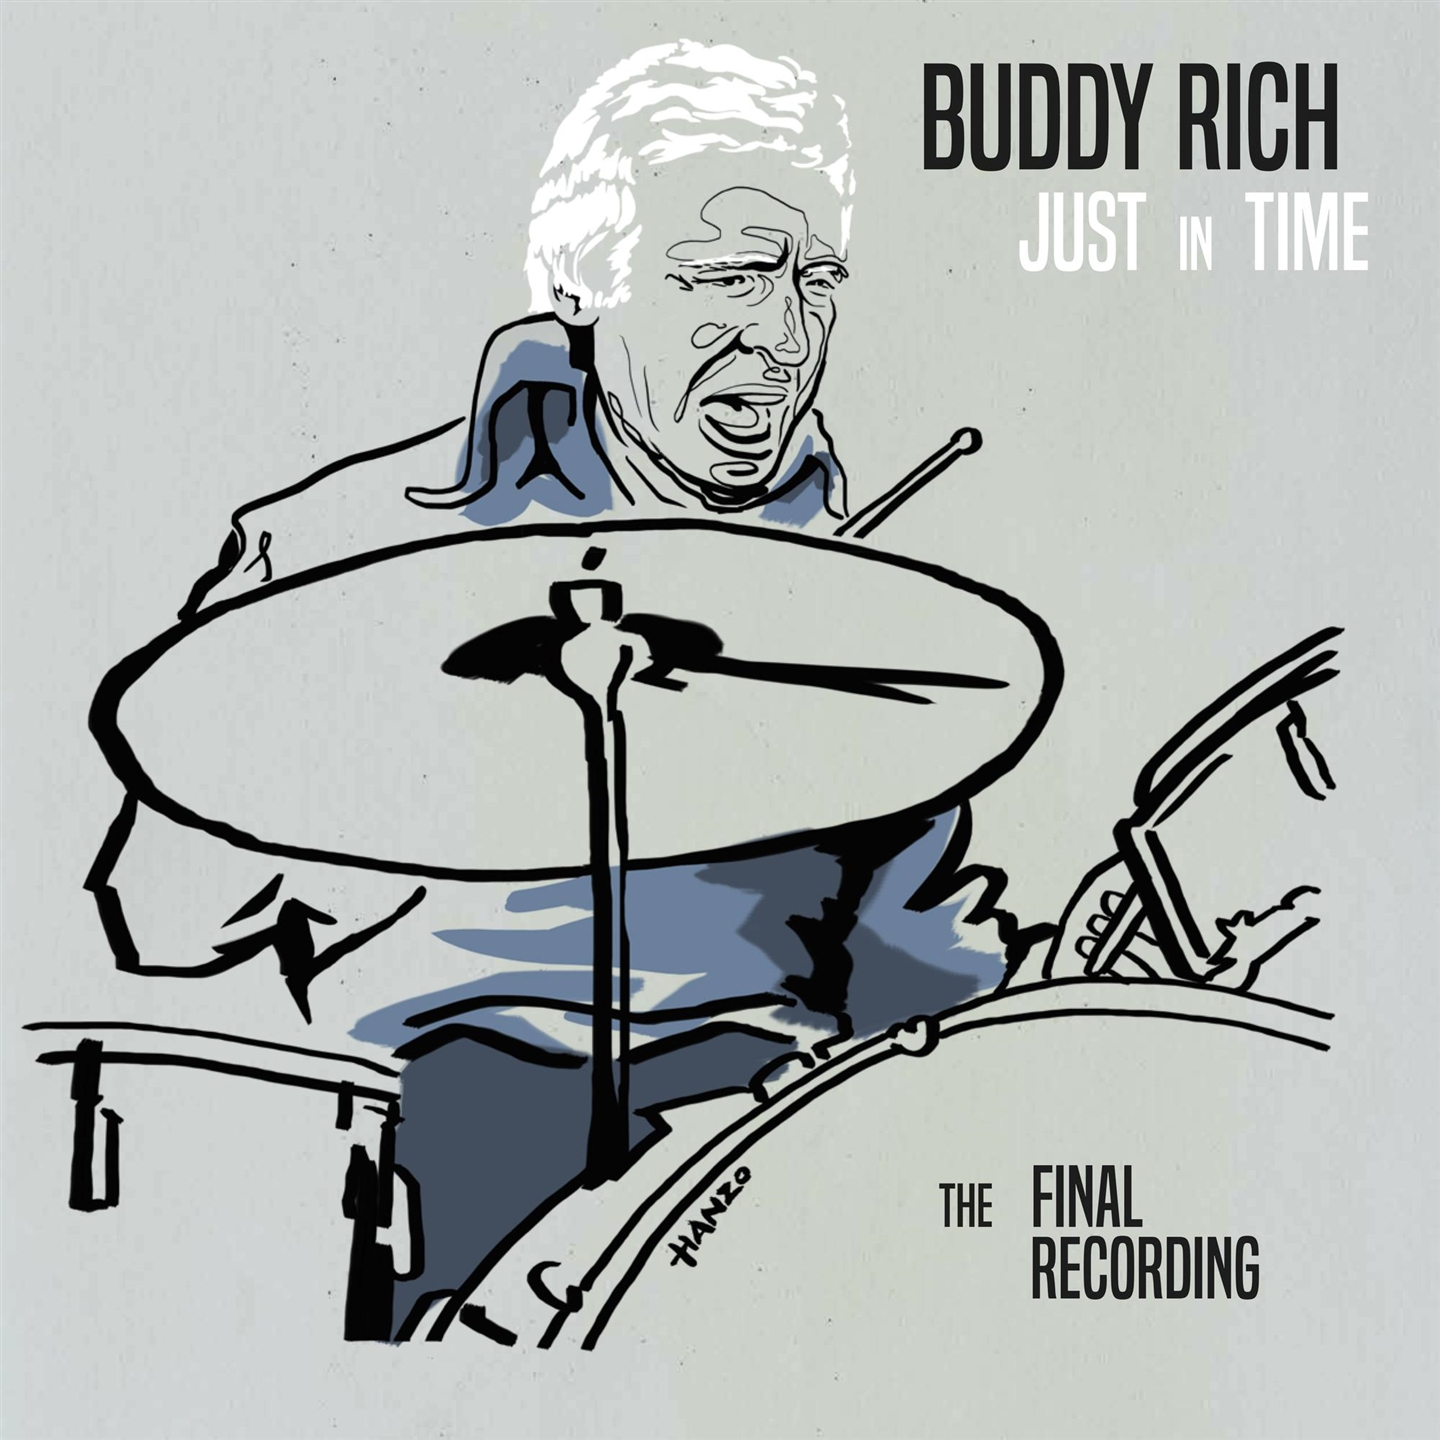 JUST IN TIME - THE FINAL RECORDING [3 LP]